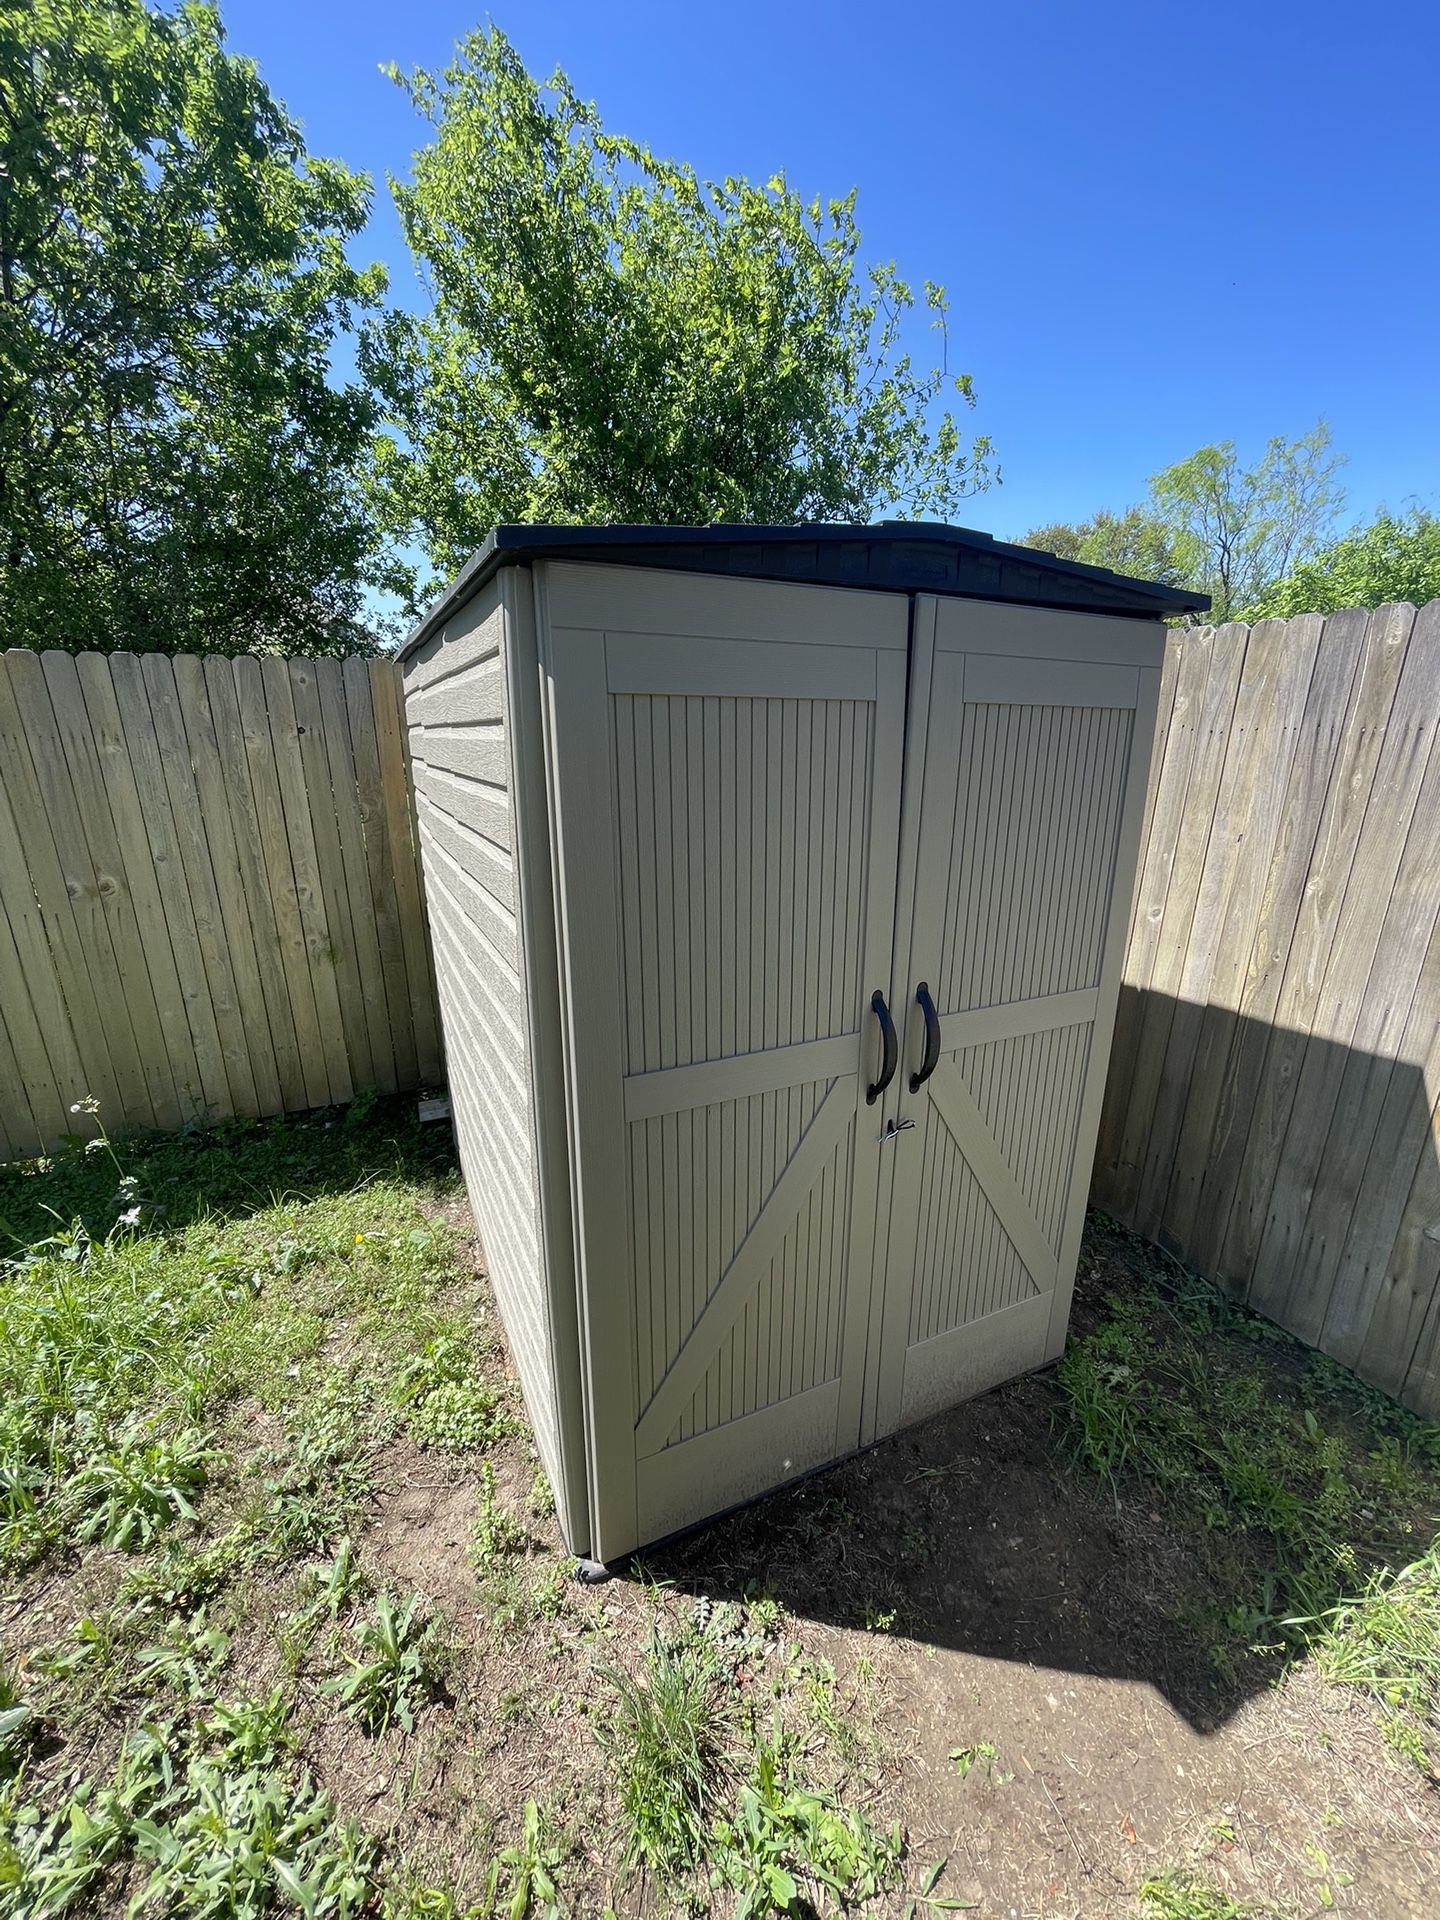 Rubbermaid Large Horizontal Resin Weather Resistant Outdoor Storage Shed,  32 cu. ft., Olive Steel/Sandstone for Sale in Hollywood, CA - OfferUp